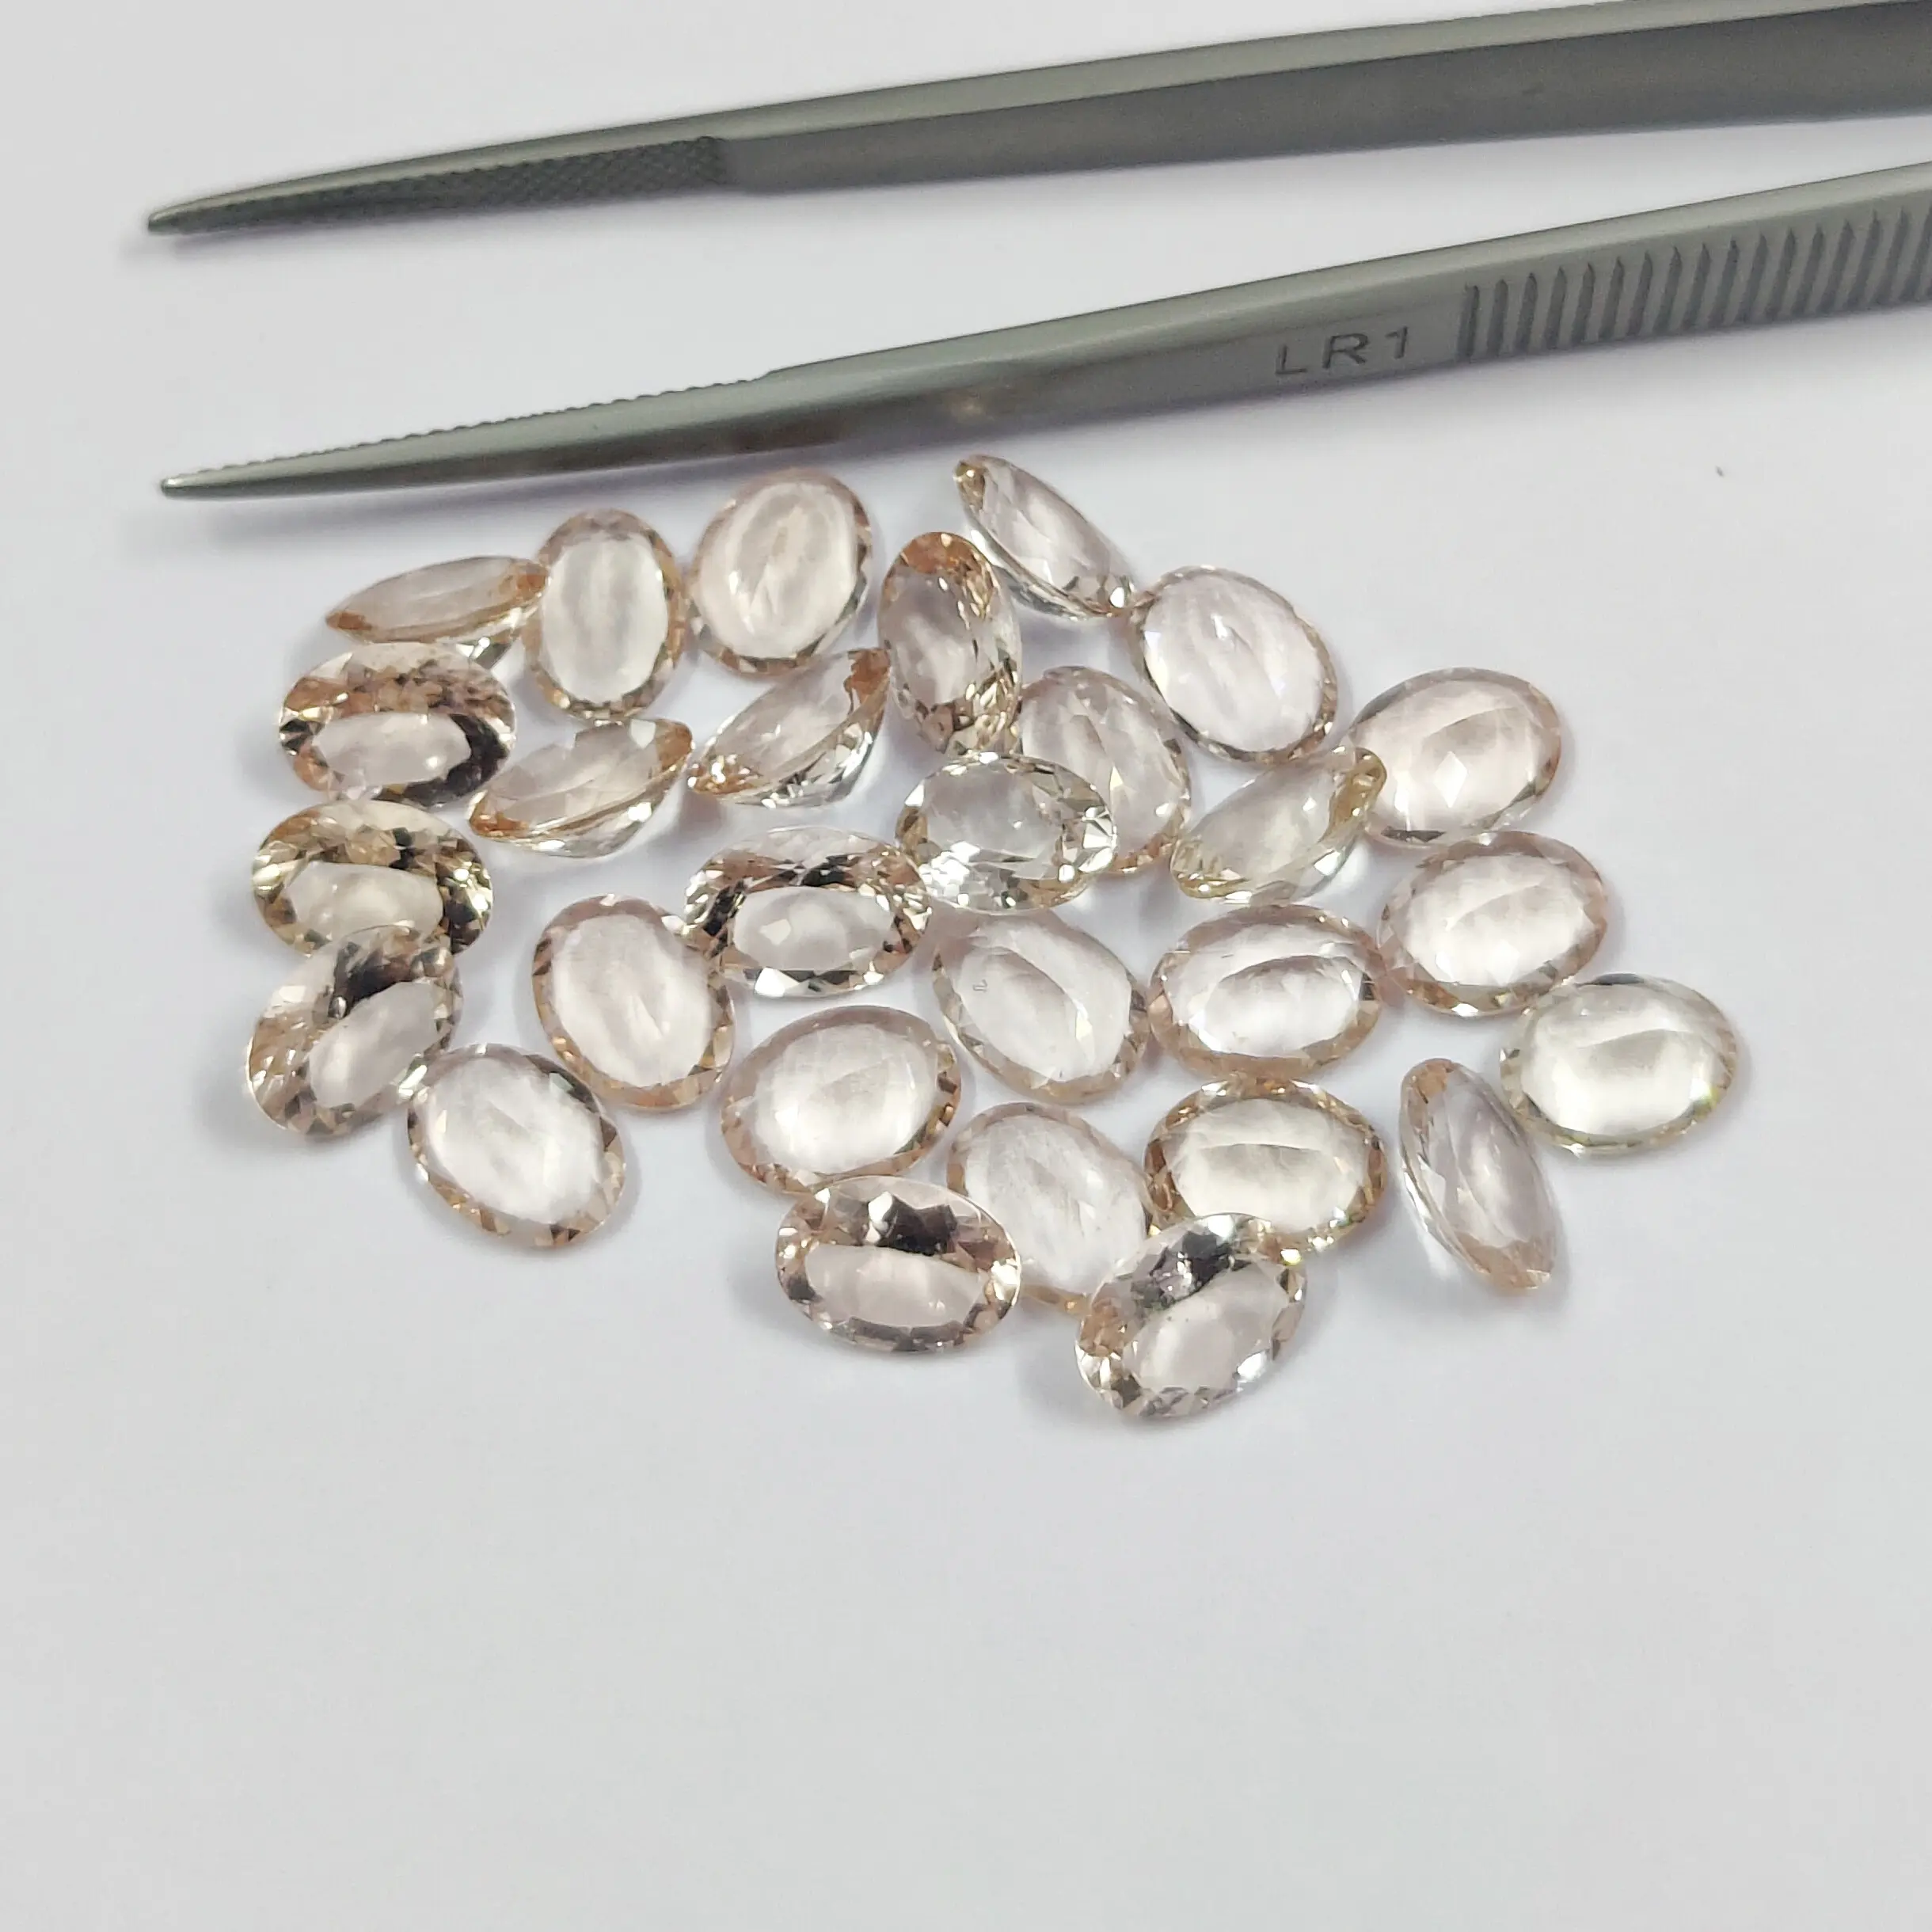 Natural 6x8mm Morganite Jewelry Making Faceted Oval Cut Loose Gemstone At Super Fine Quality for Free Shipping From Supplier